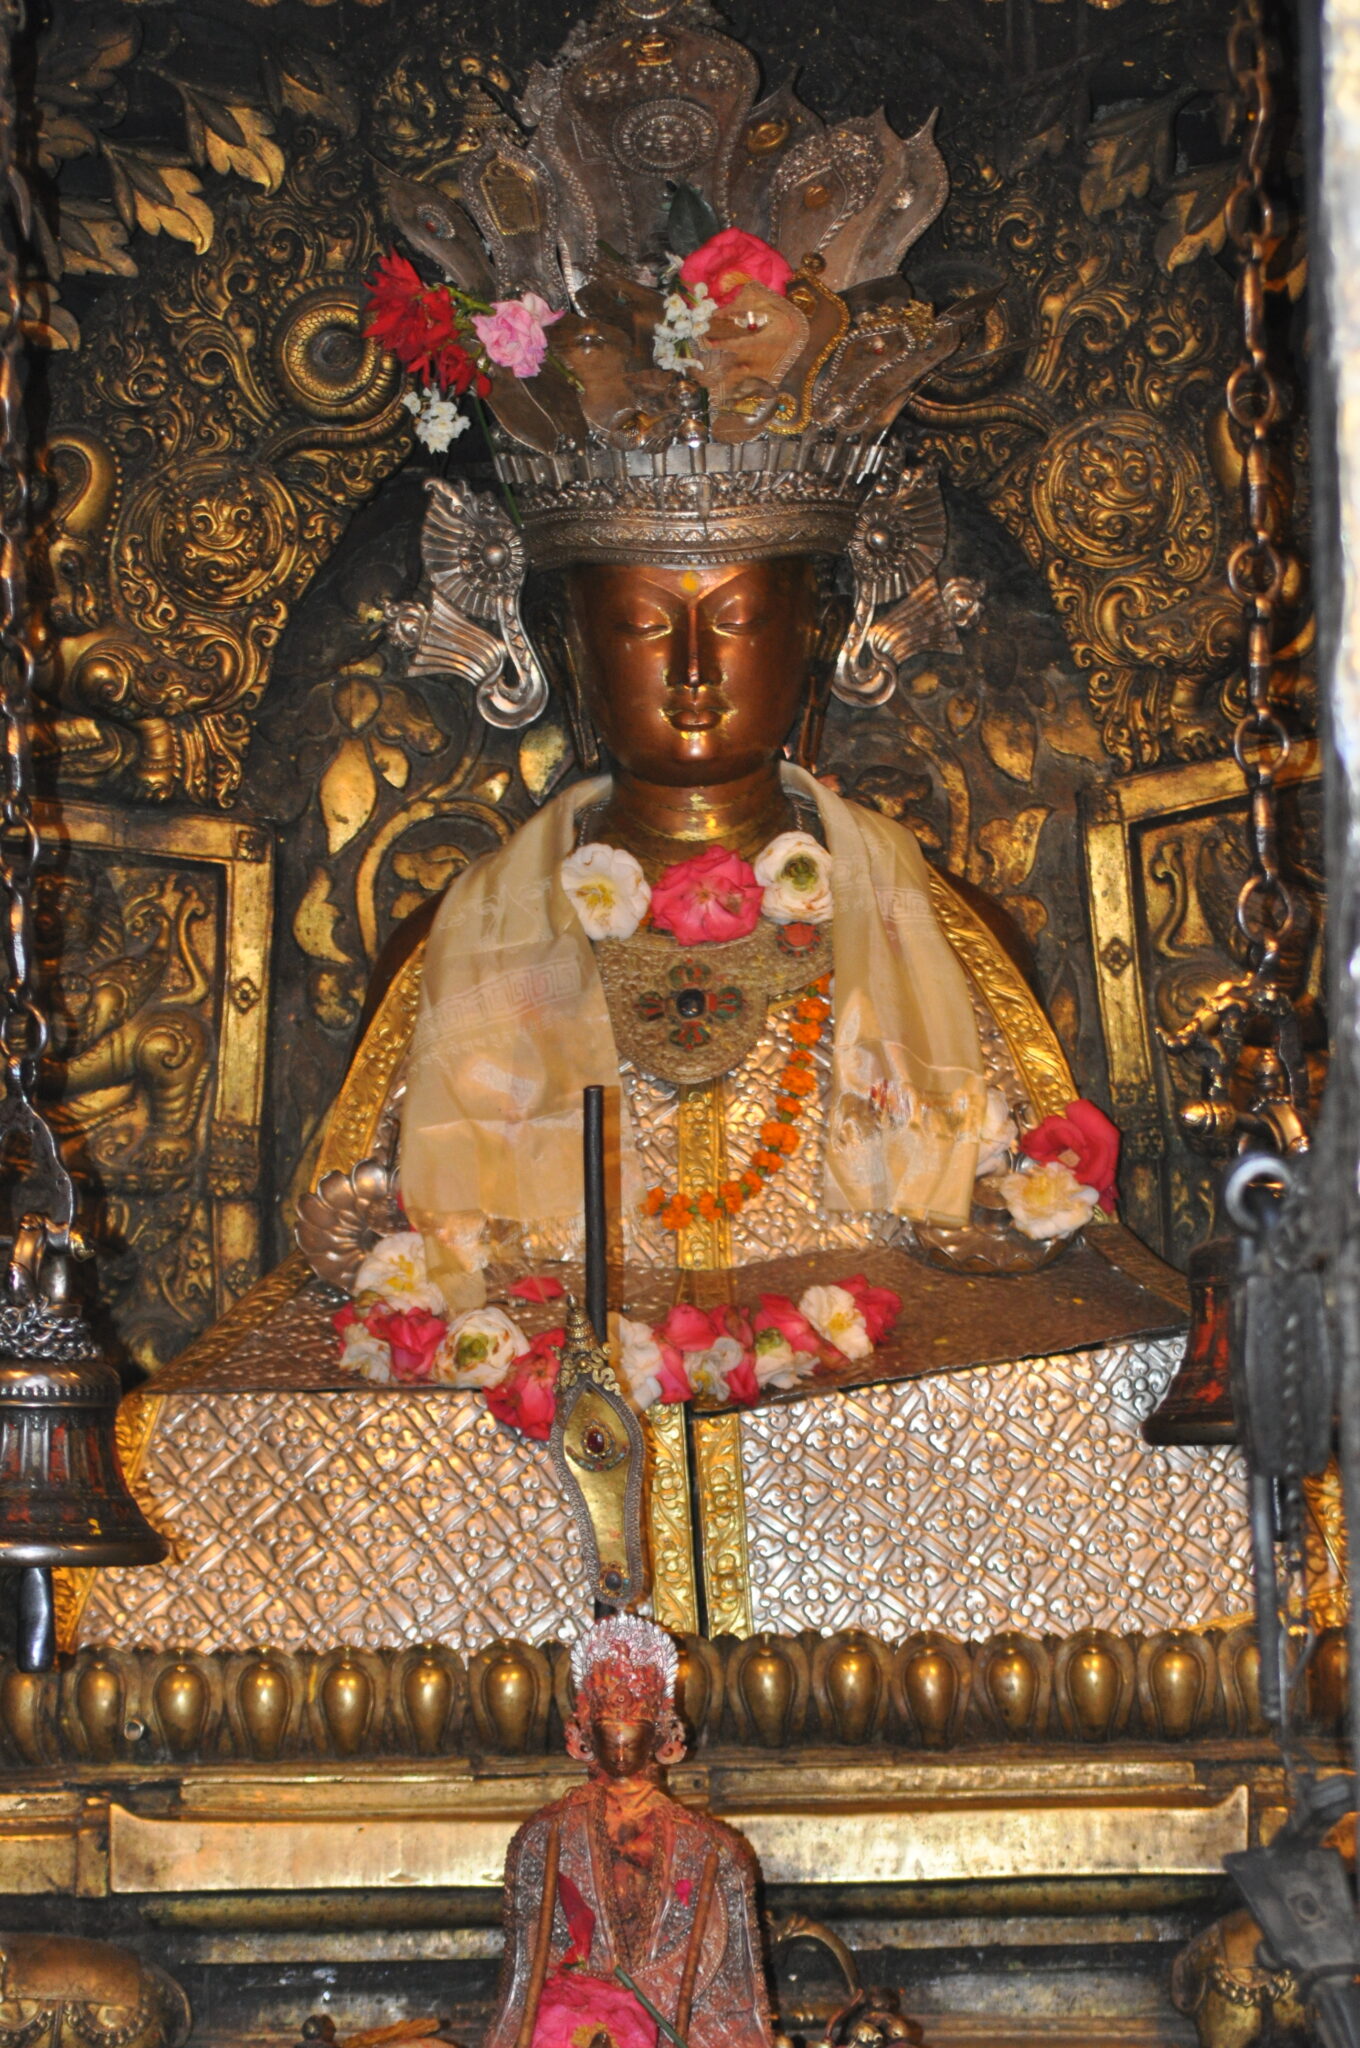 Crowned Buddha with copper face, closed eyes, and textile adornments sits before carved nimbus